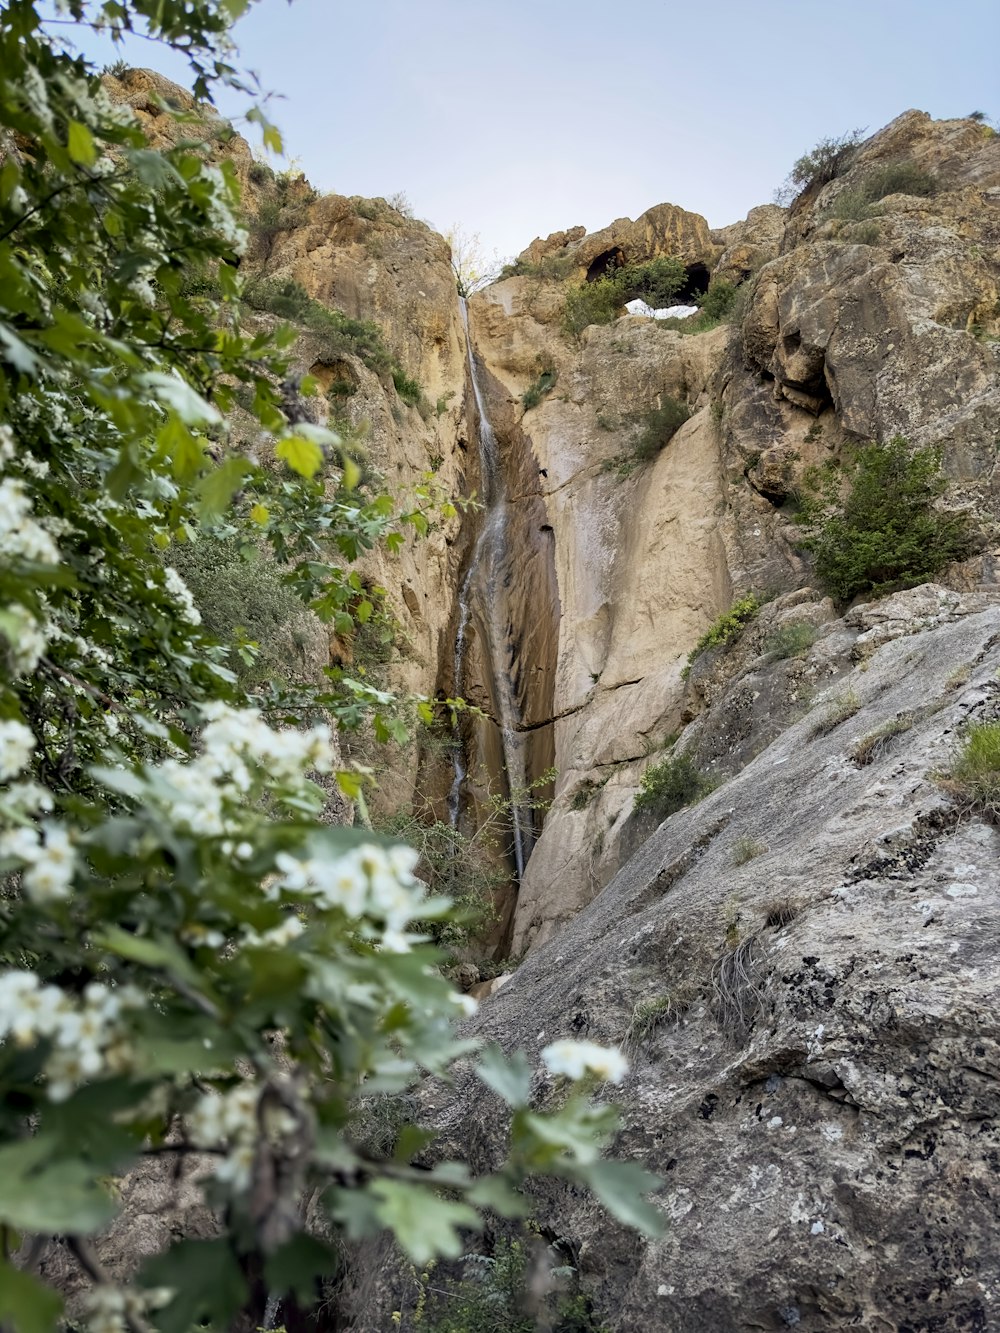 a waterfall in the middle of a rocky cliff